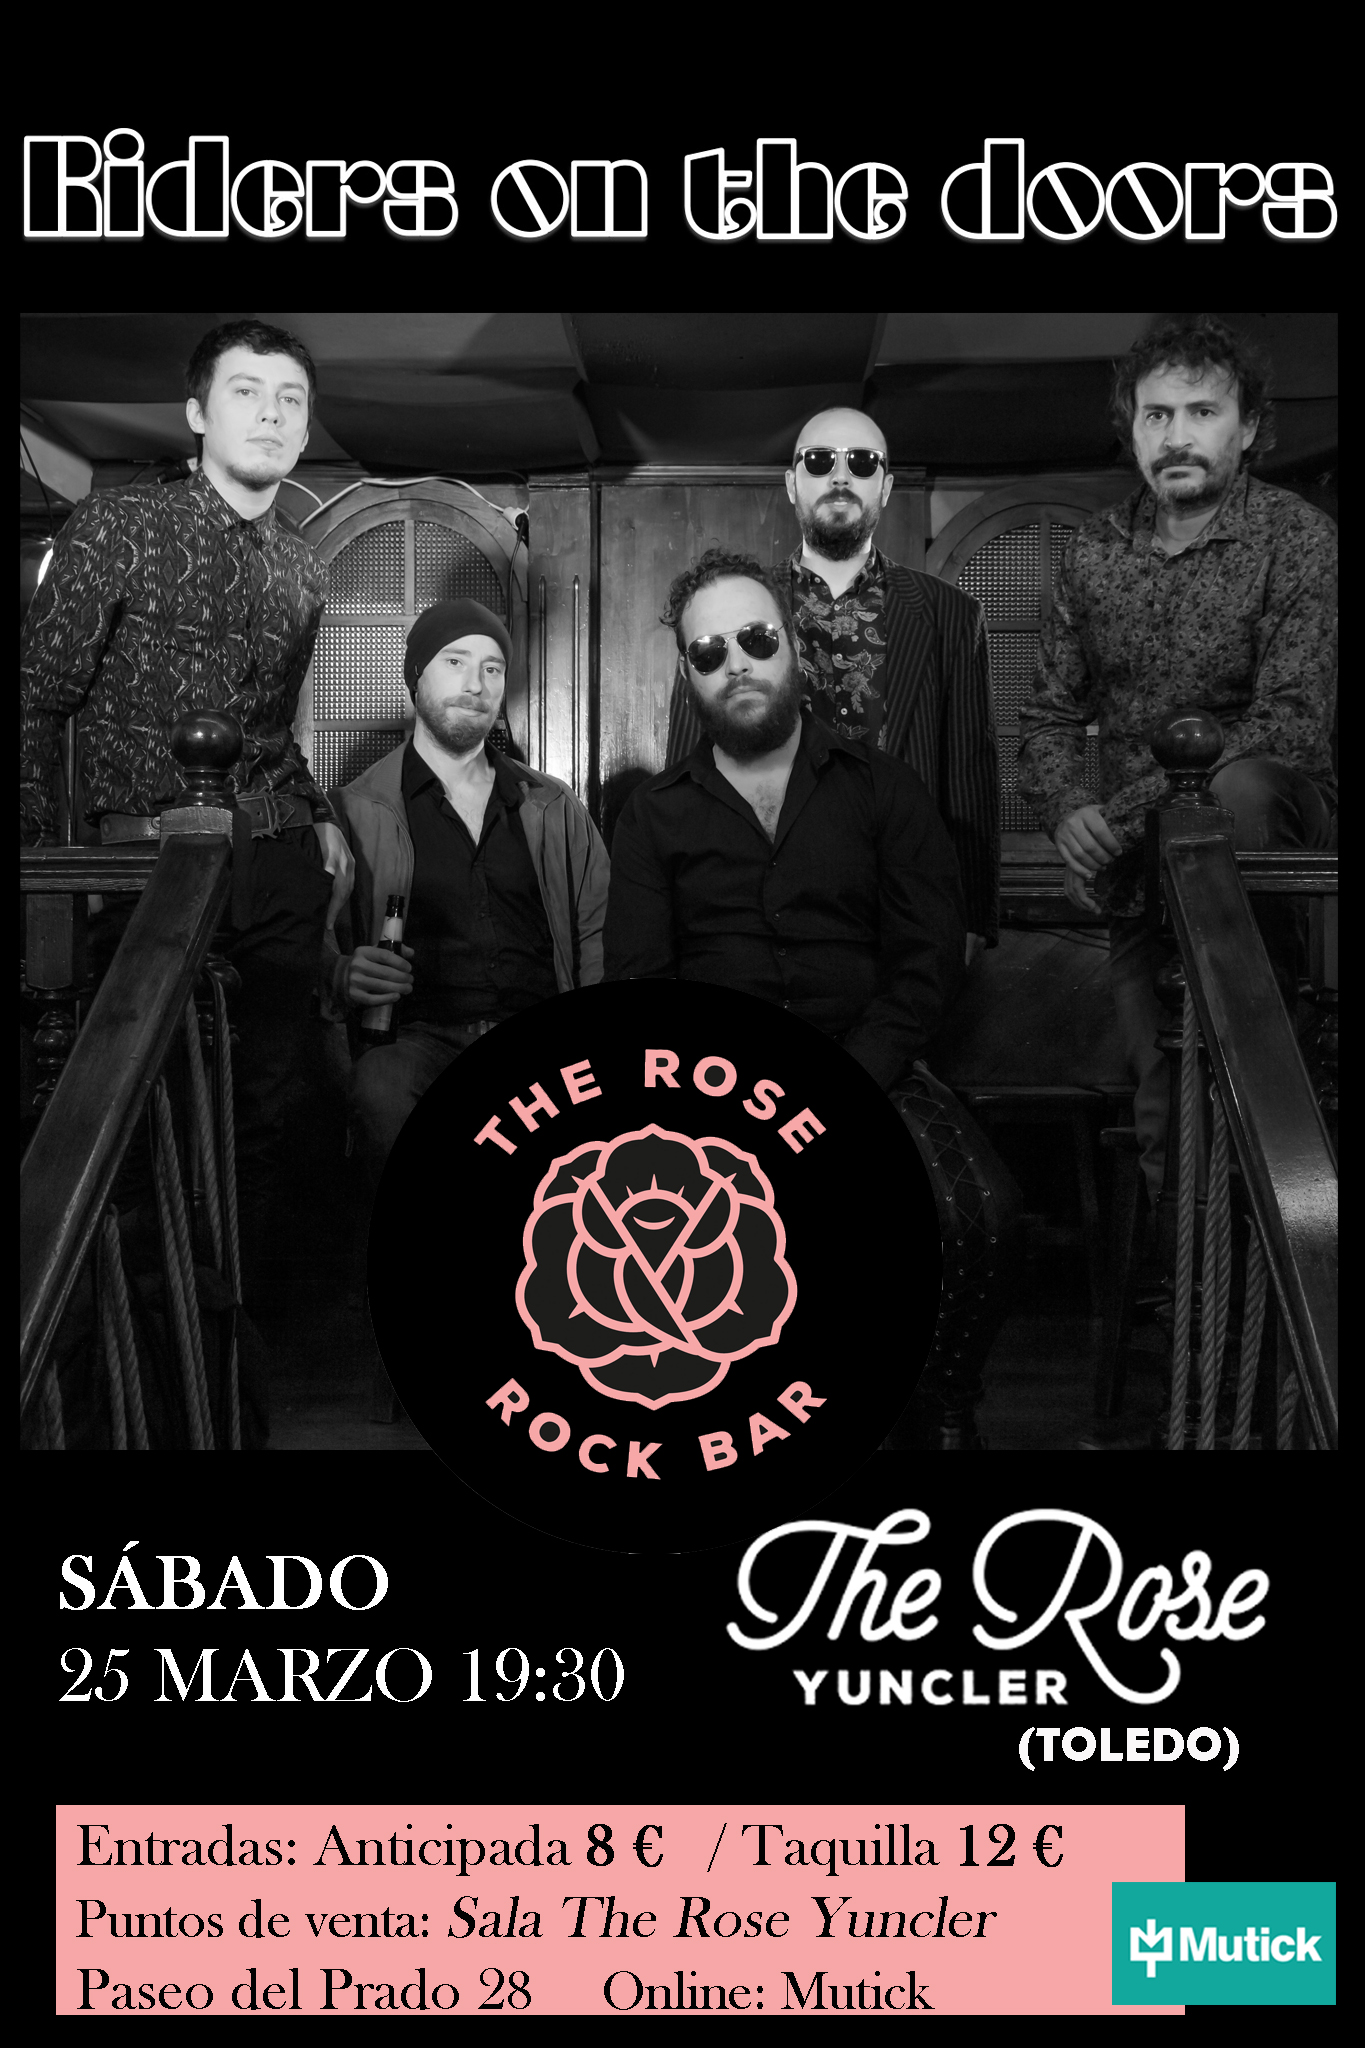 RIDERS ON THE DOORS - tributo a The Doors en The Rose Yuncler - Mutick